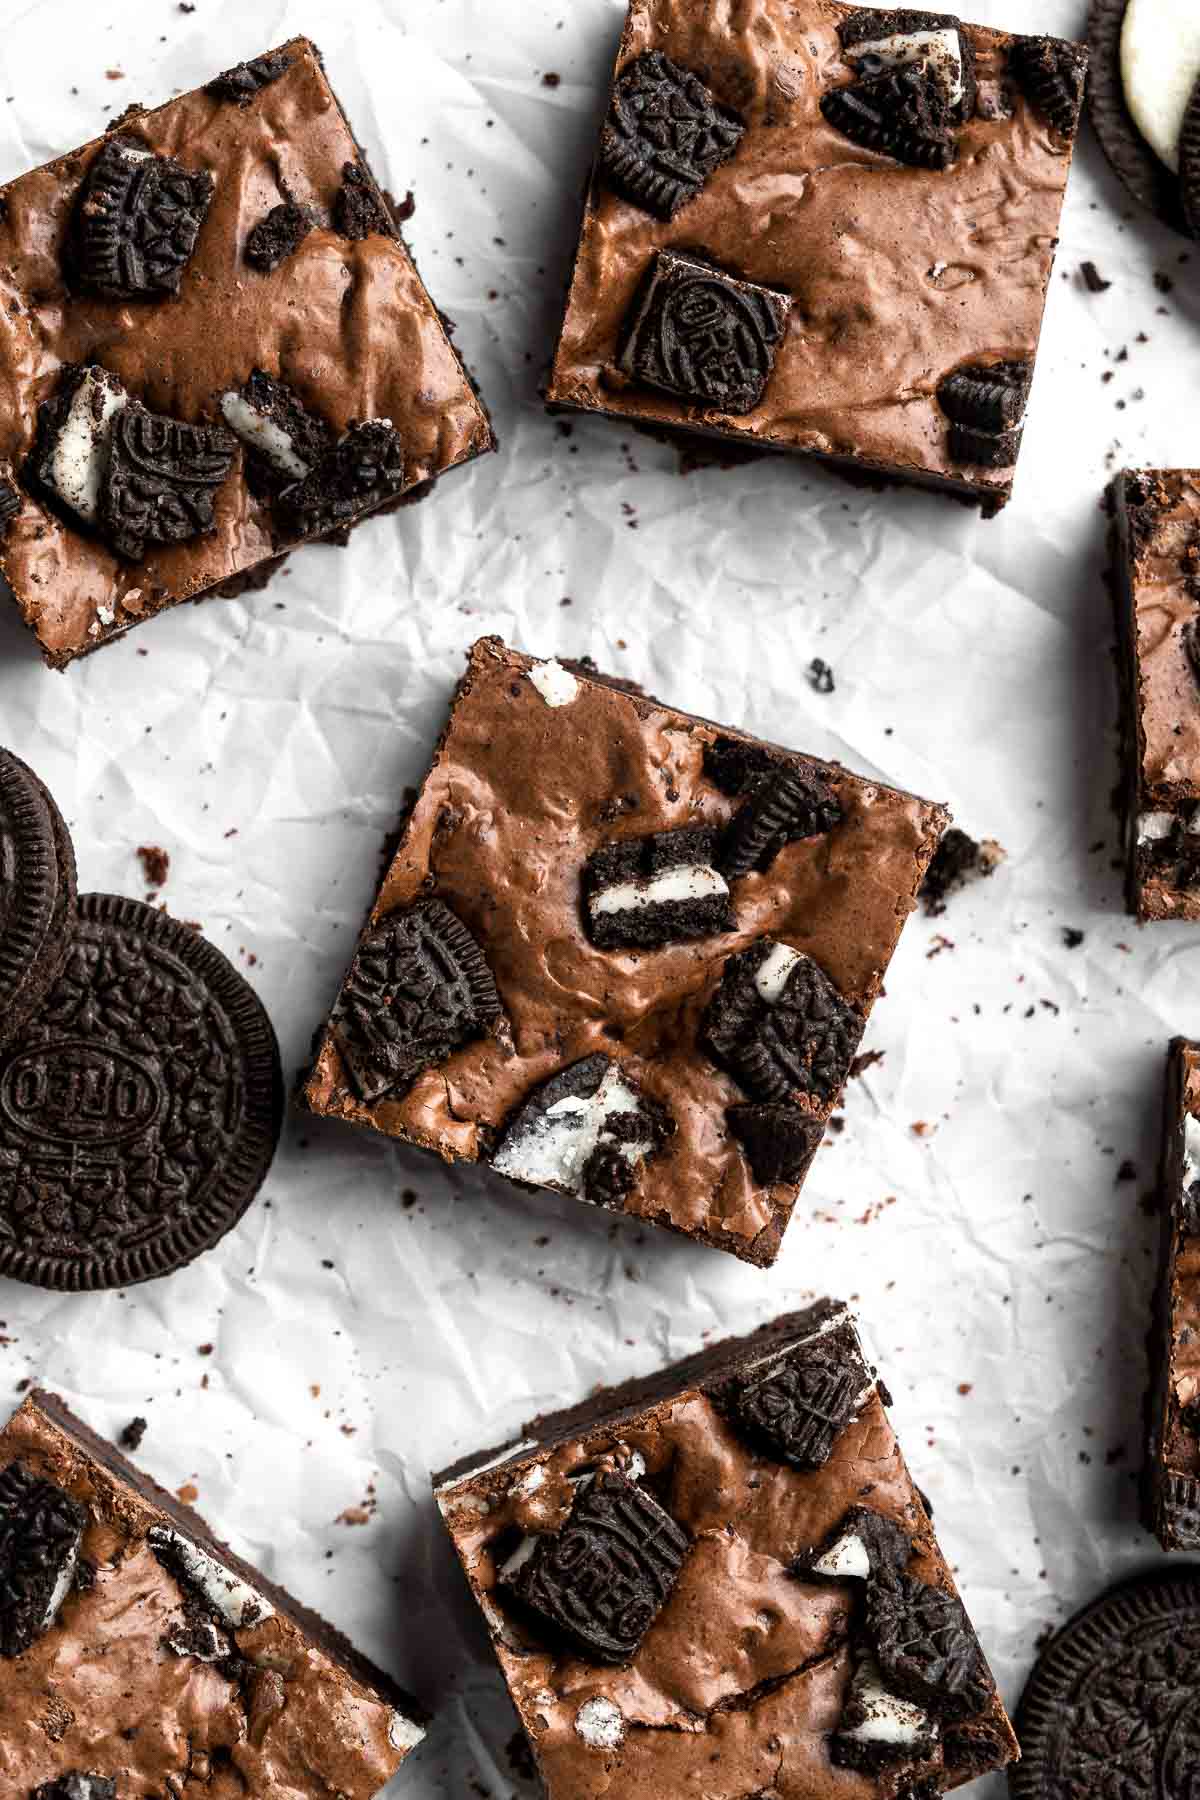 Oreo Brownies are a fudgy, rich and decadent dessert that is quick and easy to make from scratch in about 30 minutes using simple ingredients. | aheadofthyme.com